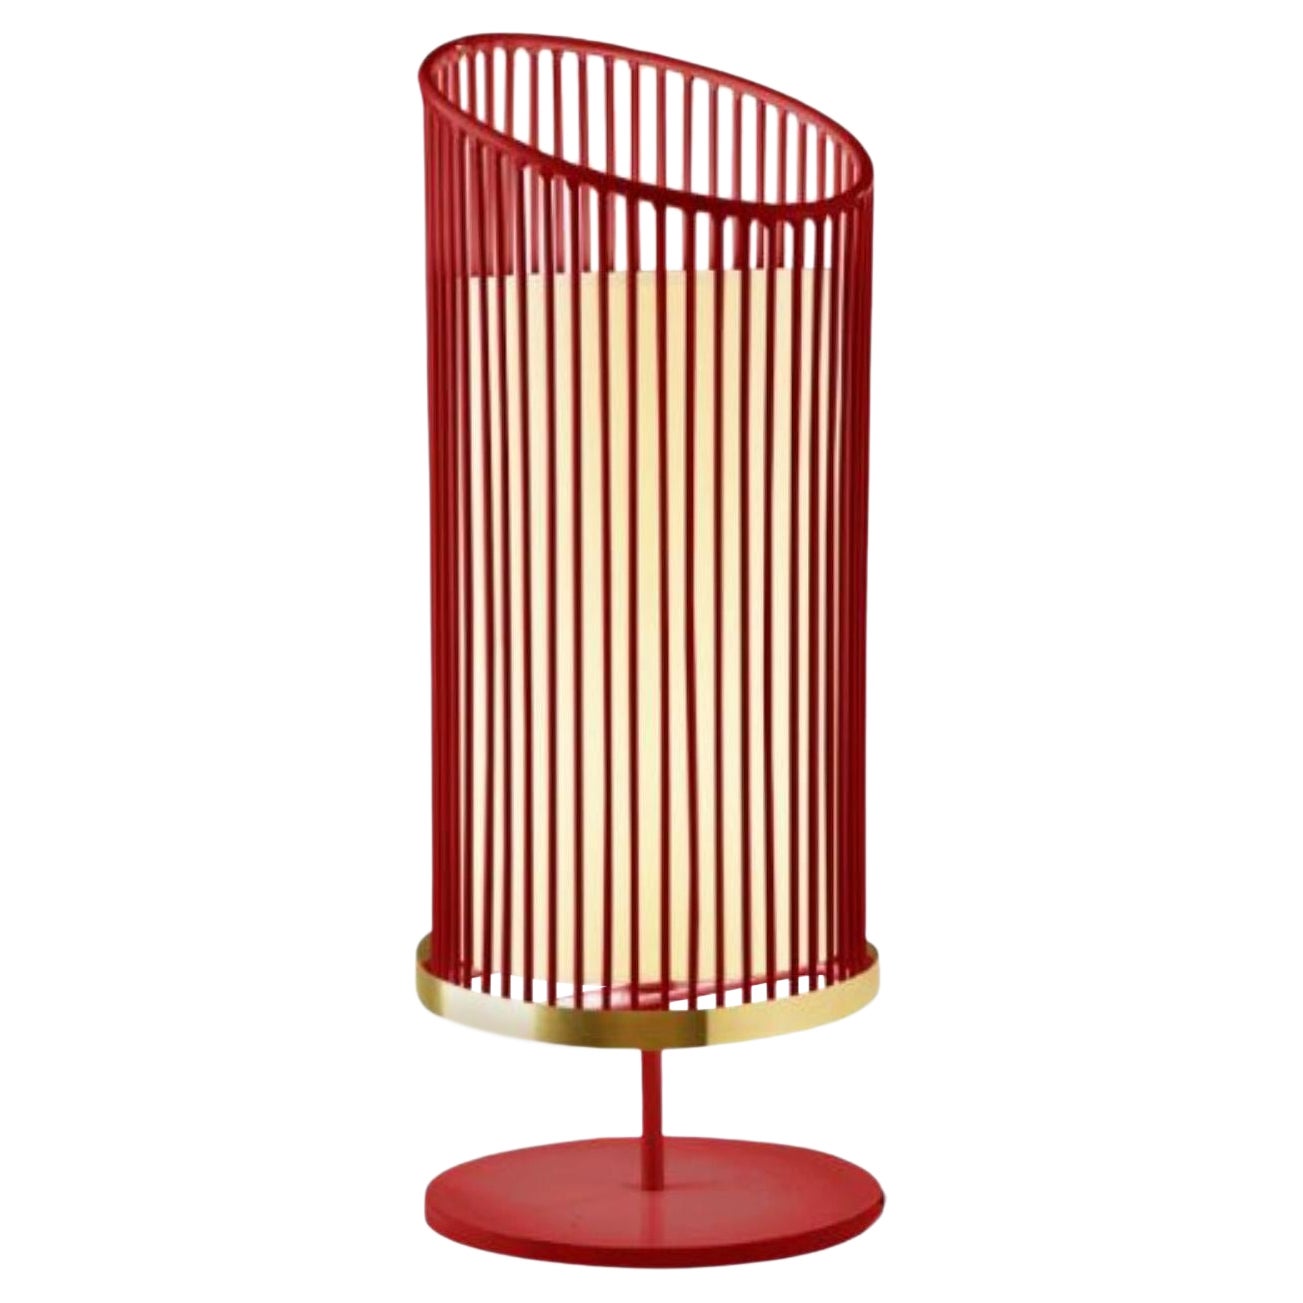 Lipstick New Spider Table Lamp with Brass Ring by Dooq For Sale